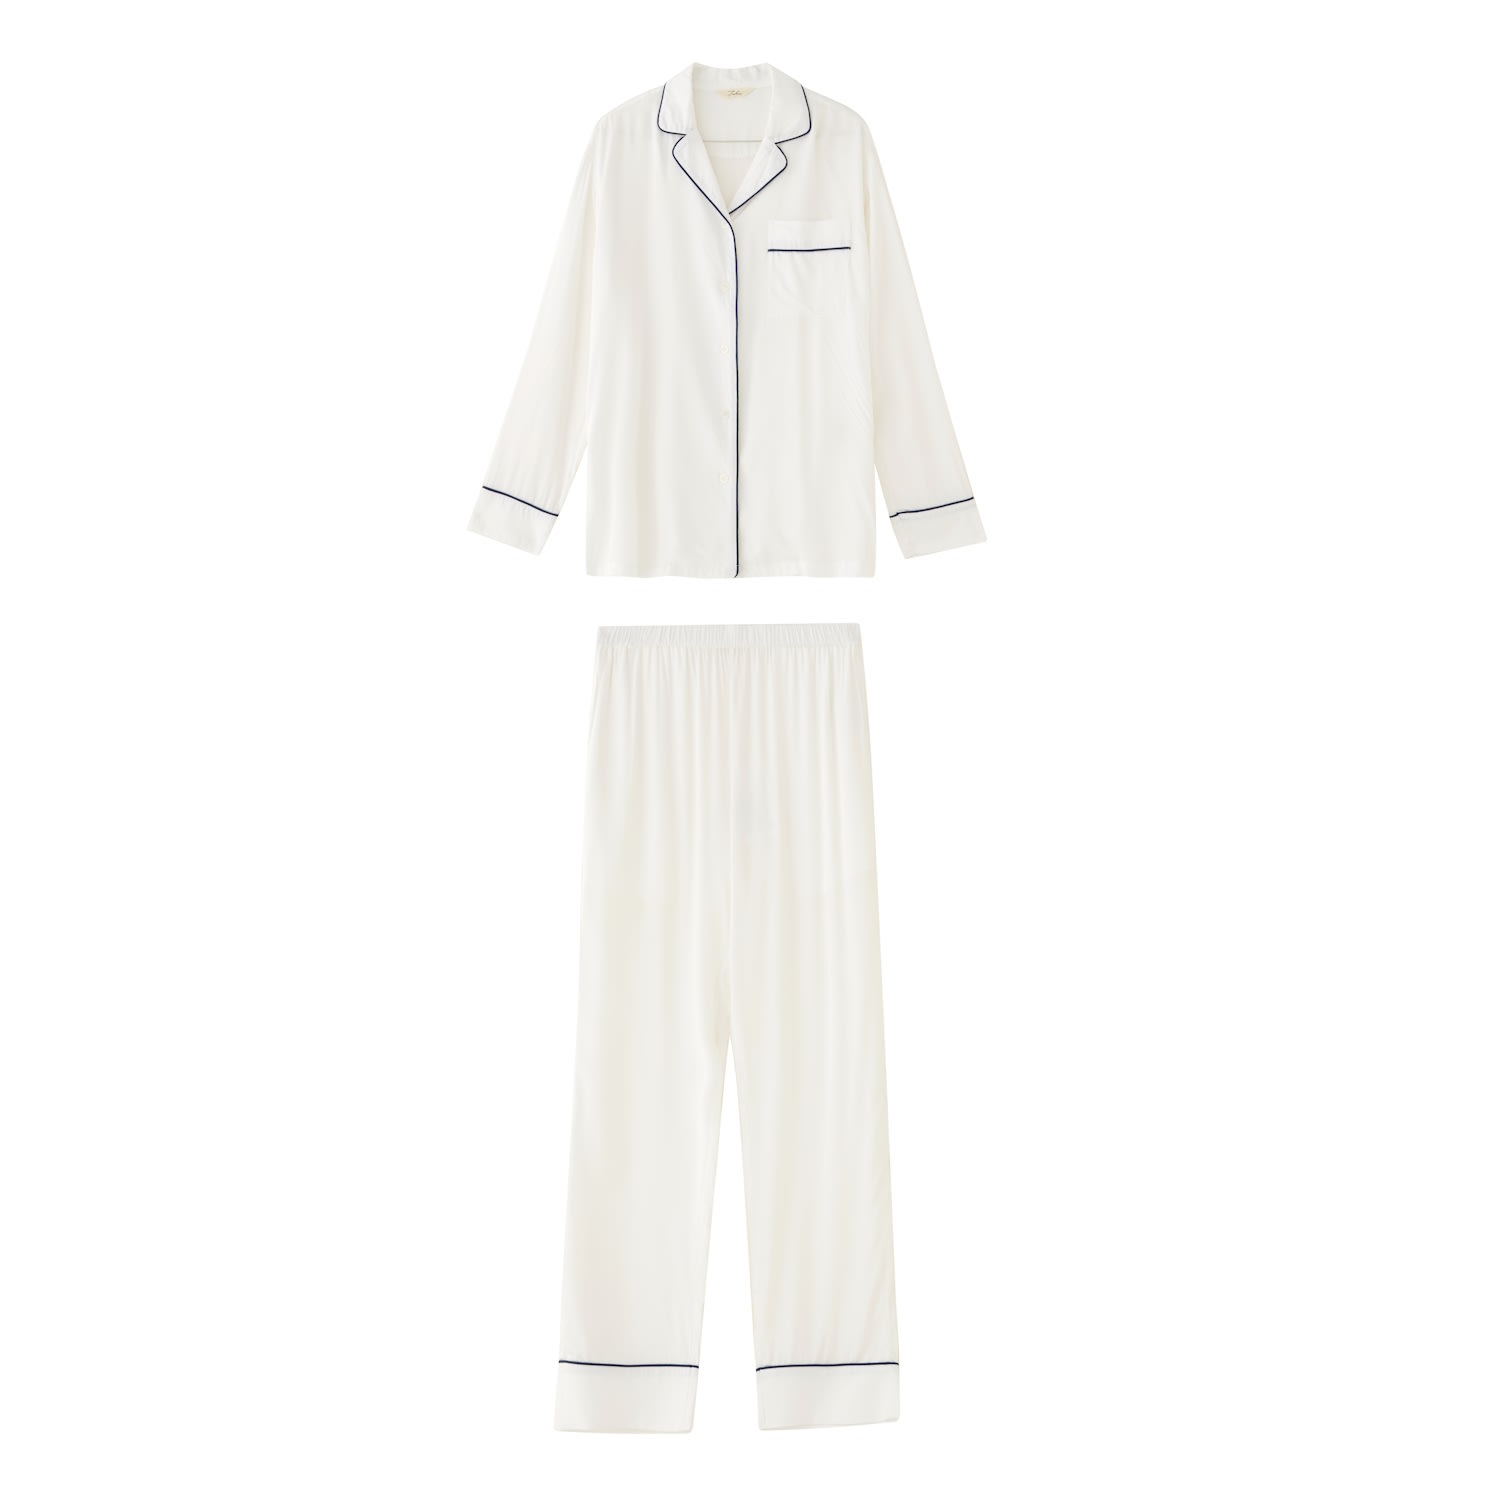 Men’s Comfort Bamboo Pajama Set - White Extra Small Notlabeled